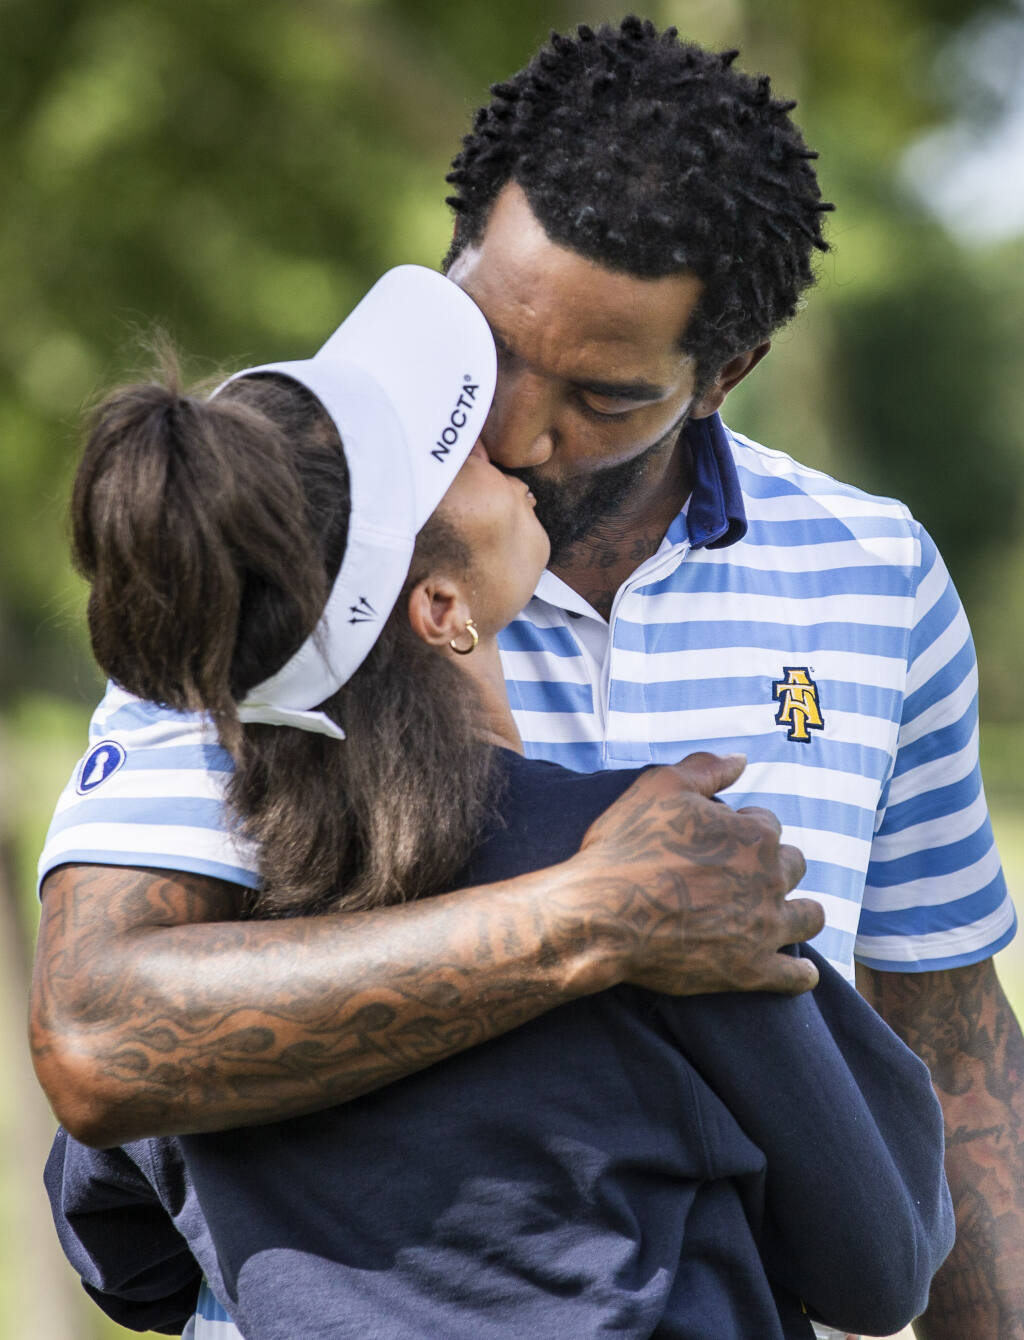 JR Smith Is Enrolled In College And Trying Out For The Golf Team